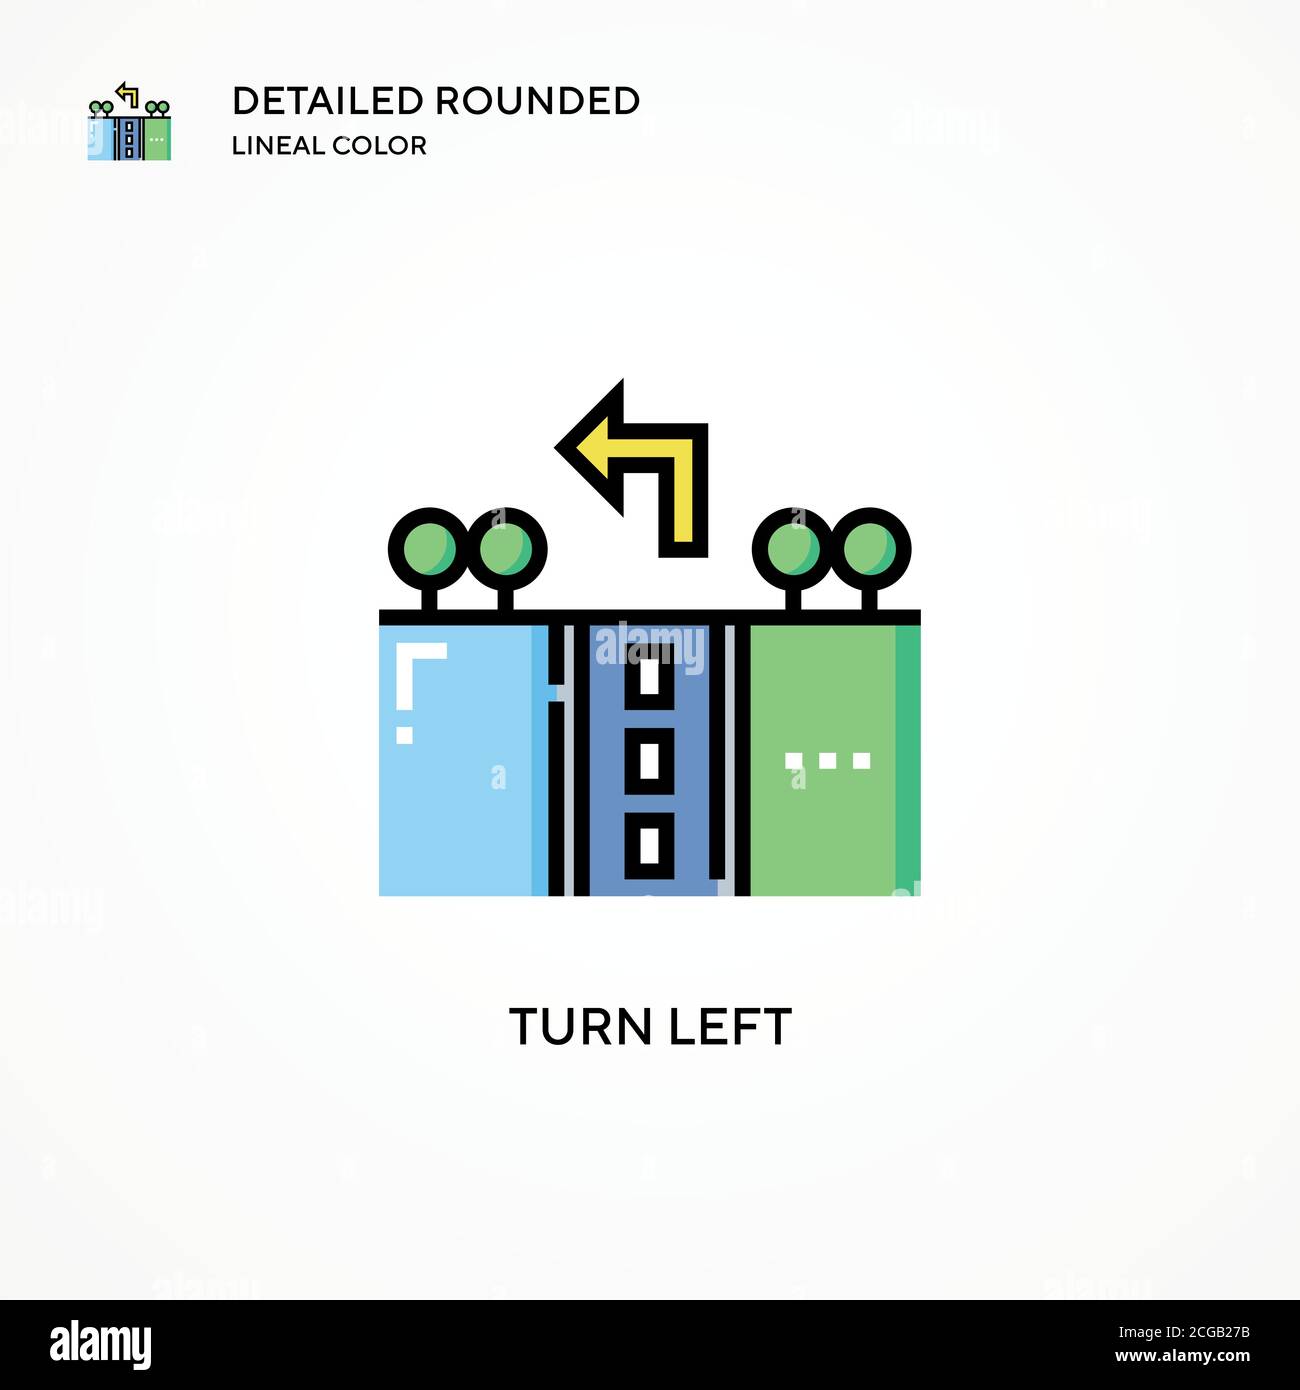 Turn left vector icon. Modern vector illustration concepts. Easy to edit and customize. Stock Vector